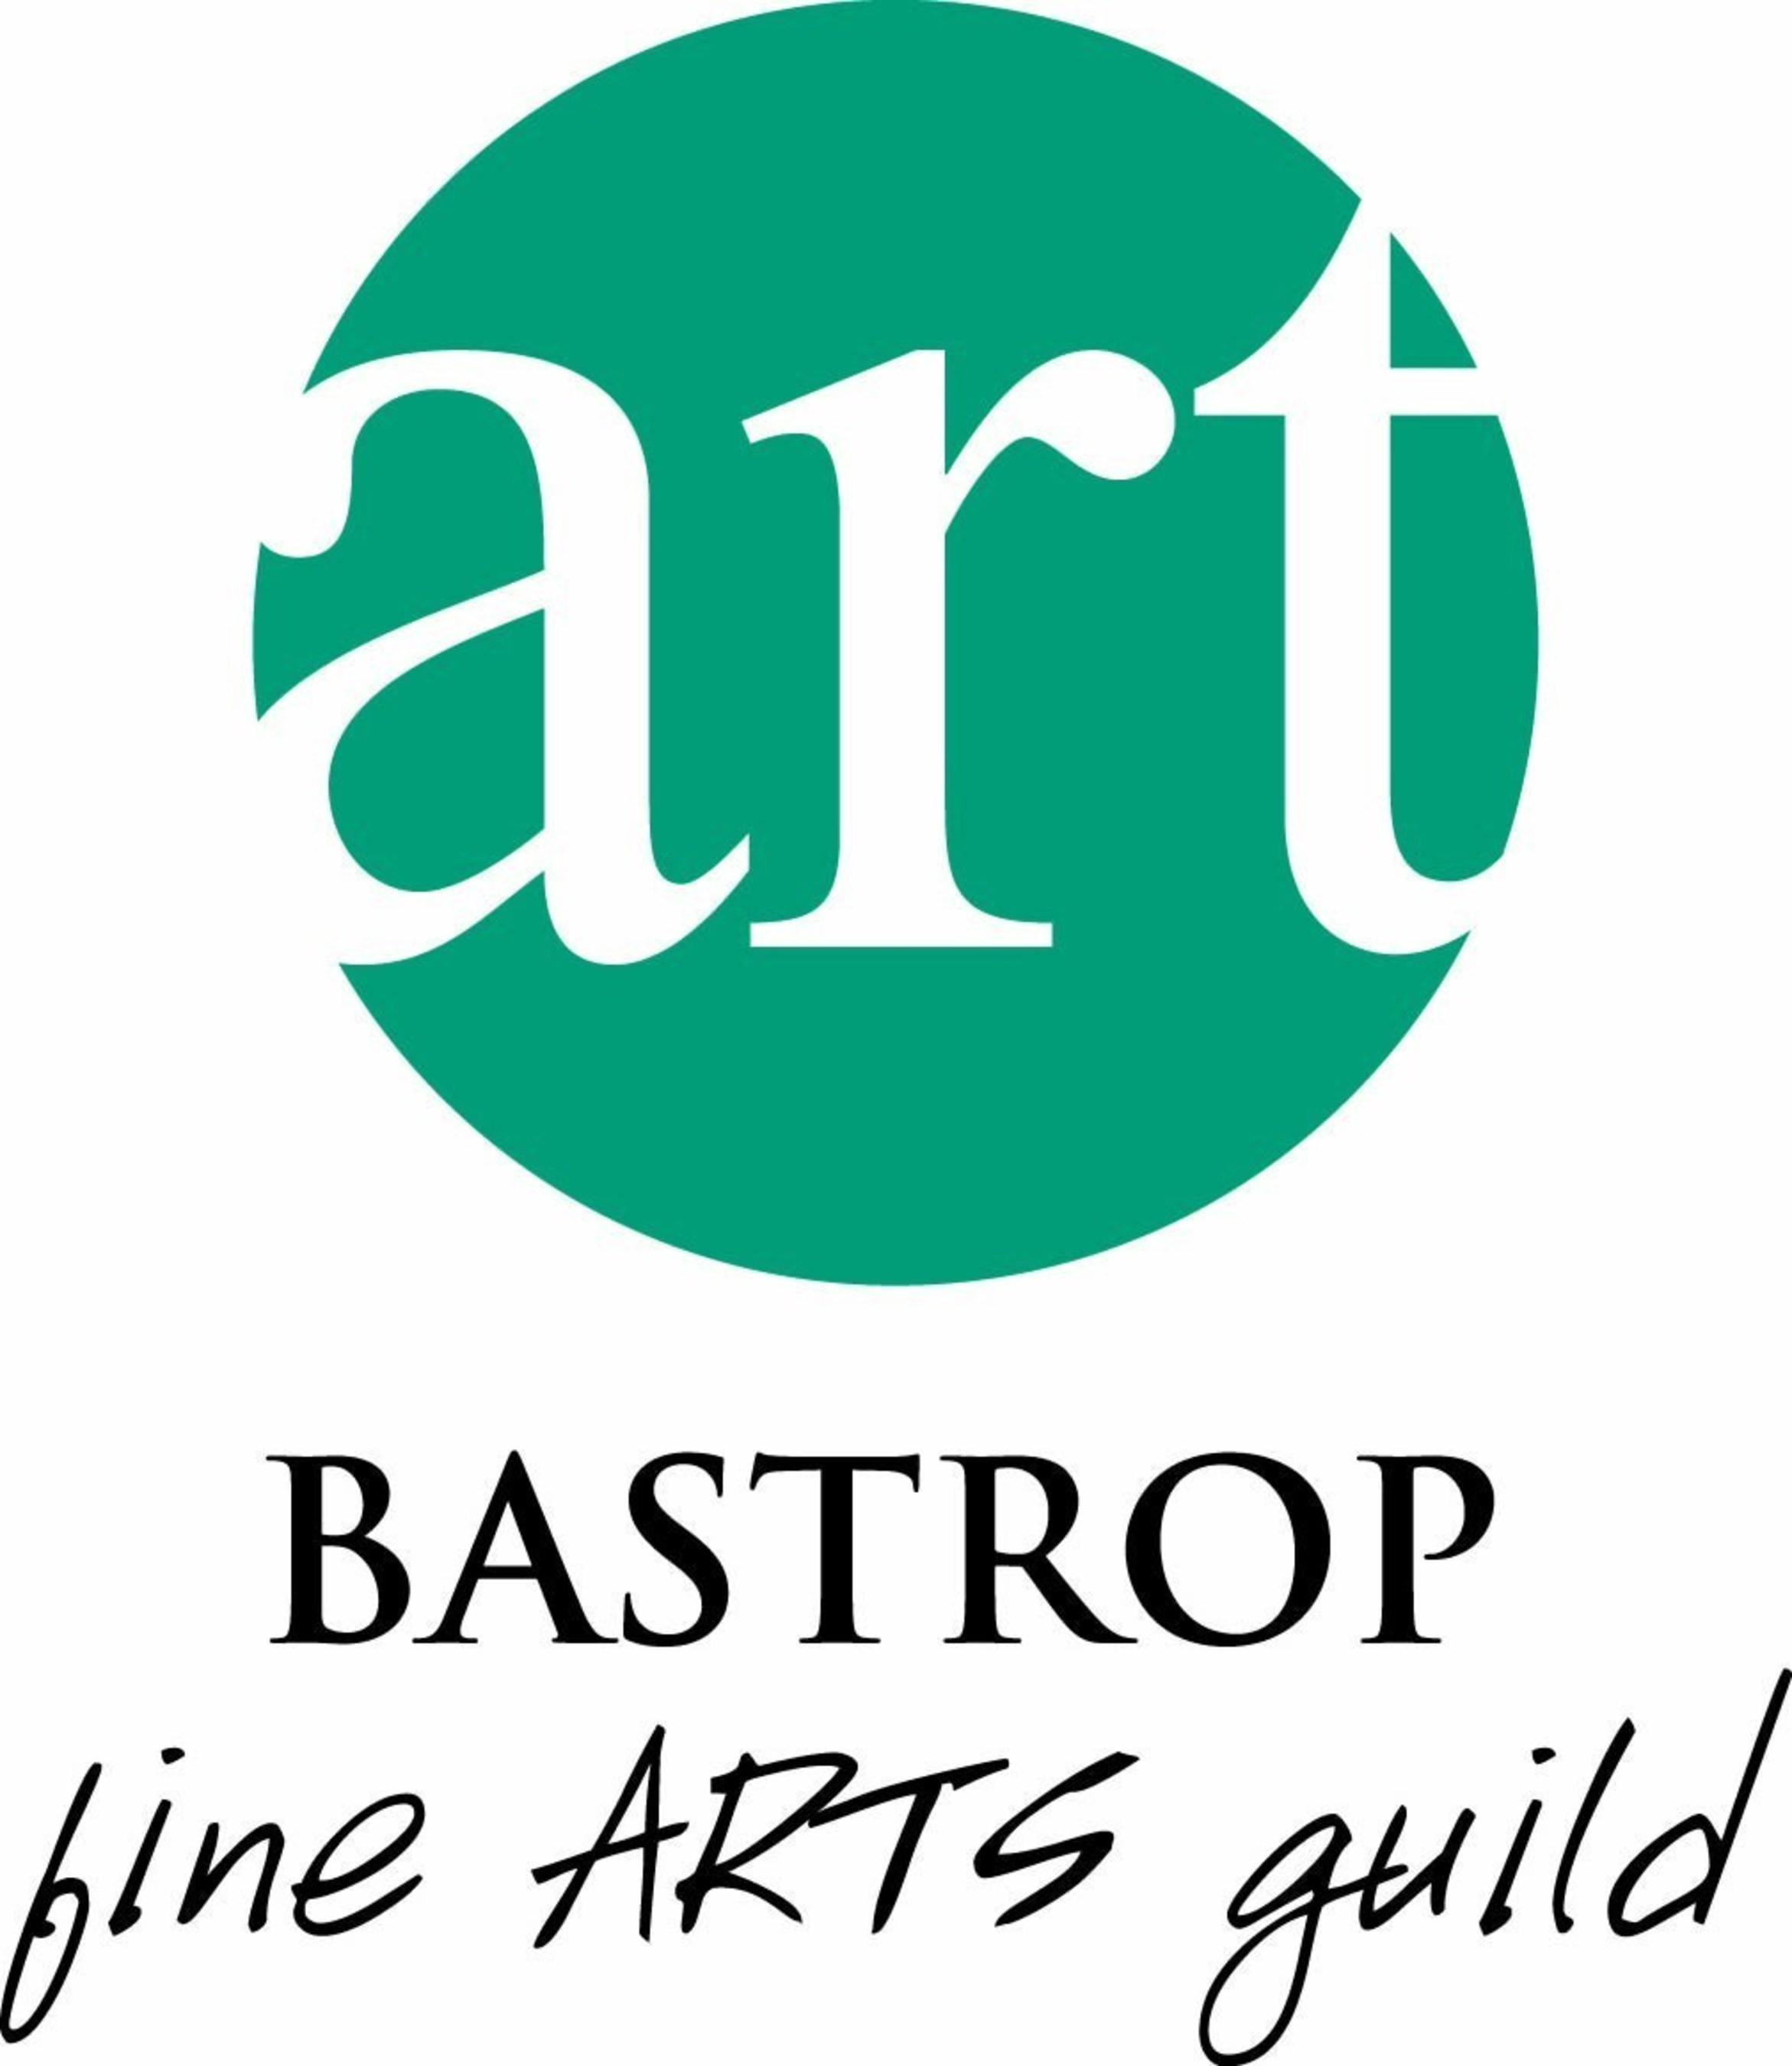 The Fine Arts Guild of Bastrop is an association of artists which was formed for the mutual aid and promotion of artists in the Lost Pines community. It serves to encourage cultural interest in and appreciation of fine art.